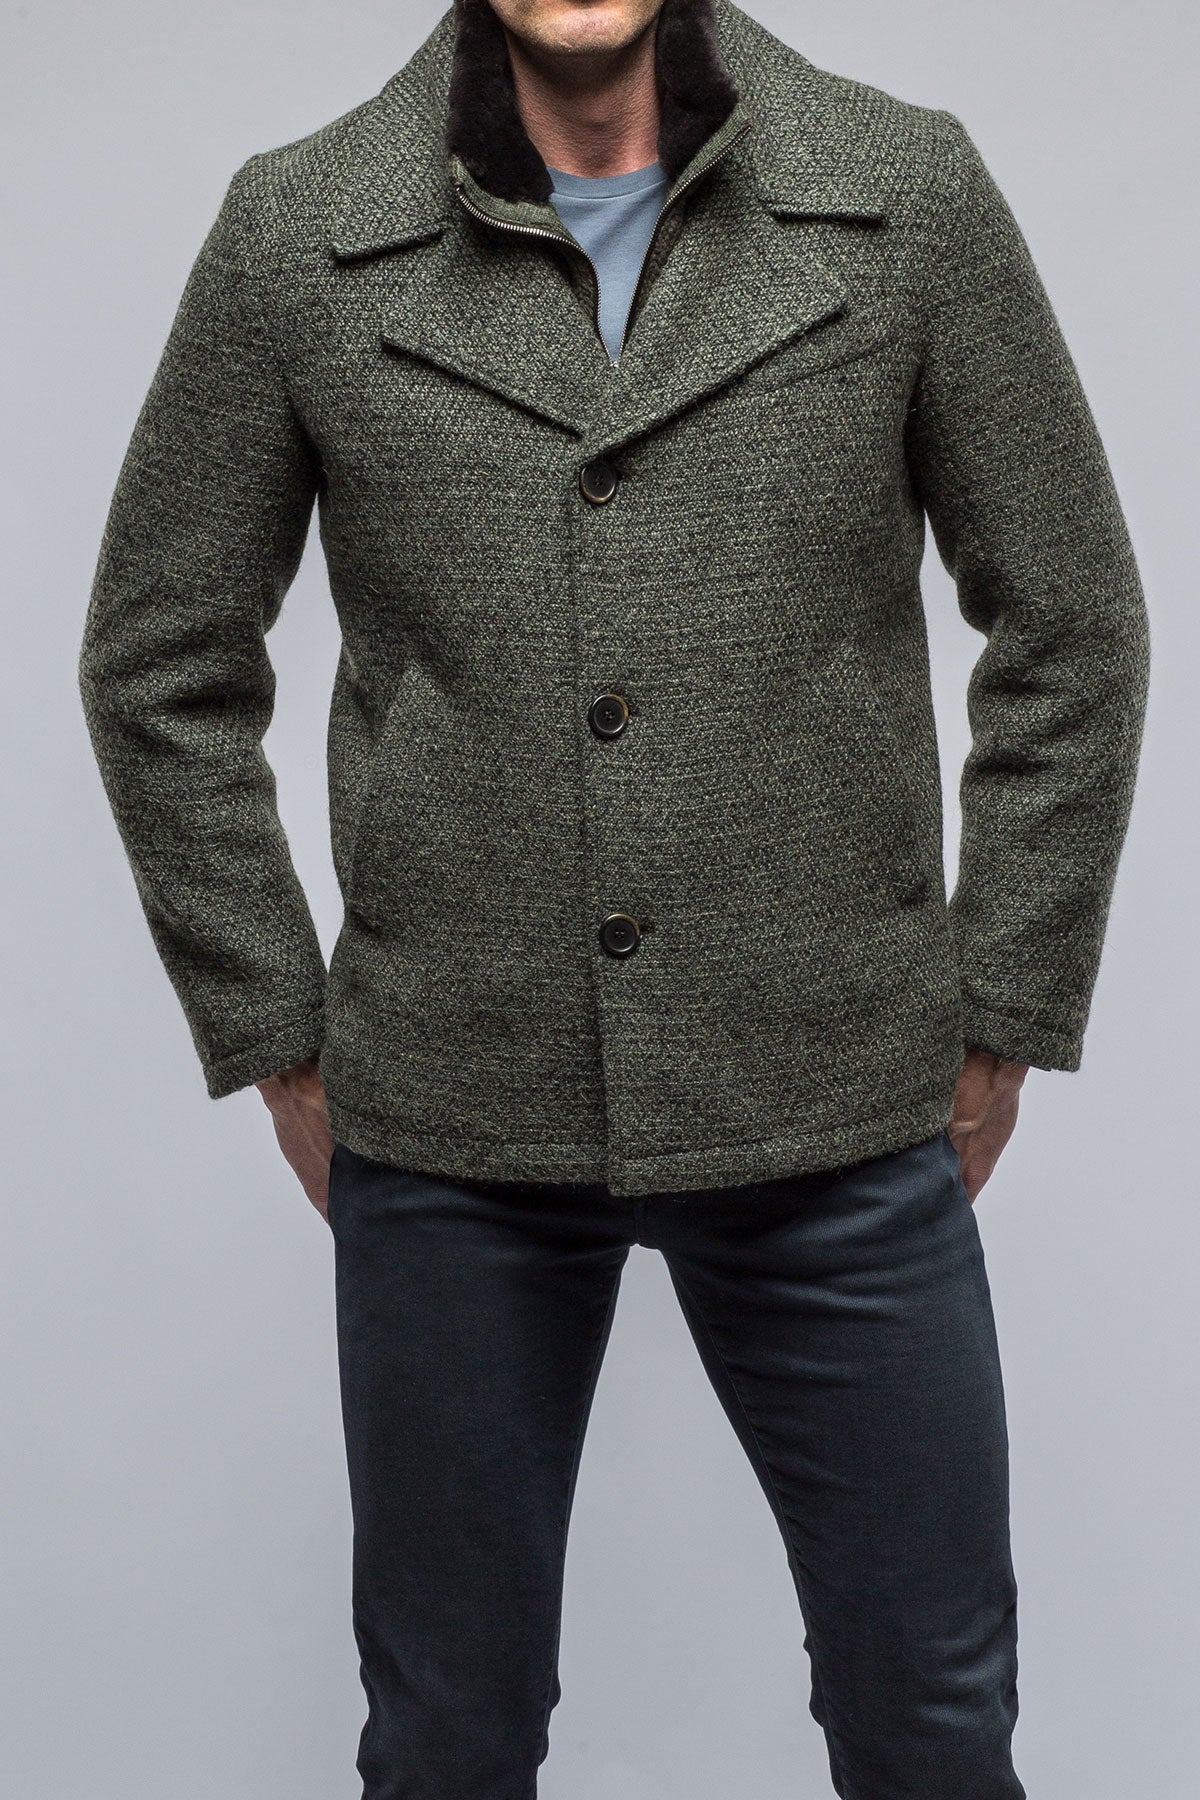 Bodie Wool/Mohair Jacket | Samples - Mens - Outerwear - Cloth | Gimo's